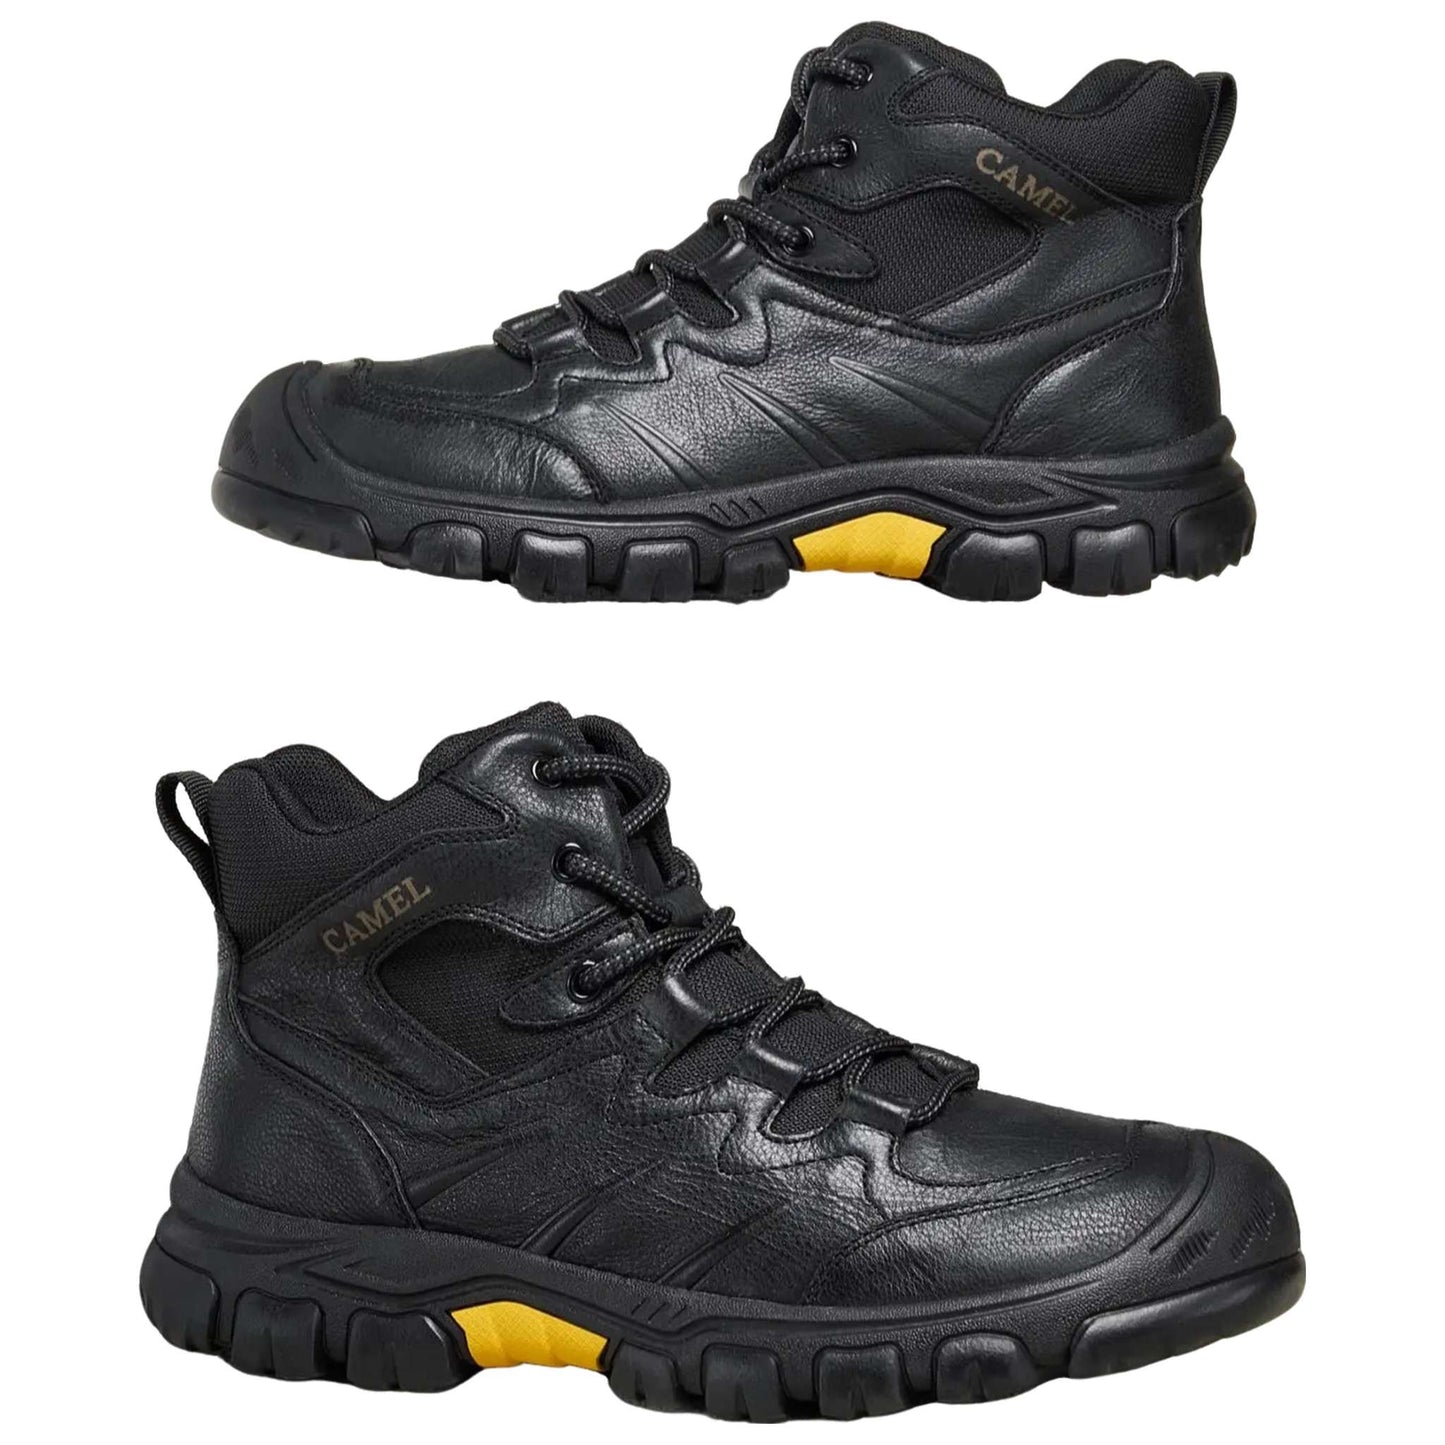 High-Top Men's Leather Hiking Boots - Durable Outdoor Trekking Shoes with Non-Slip Sole